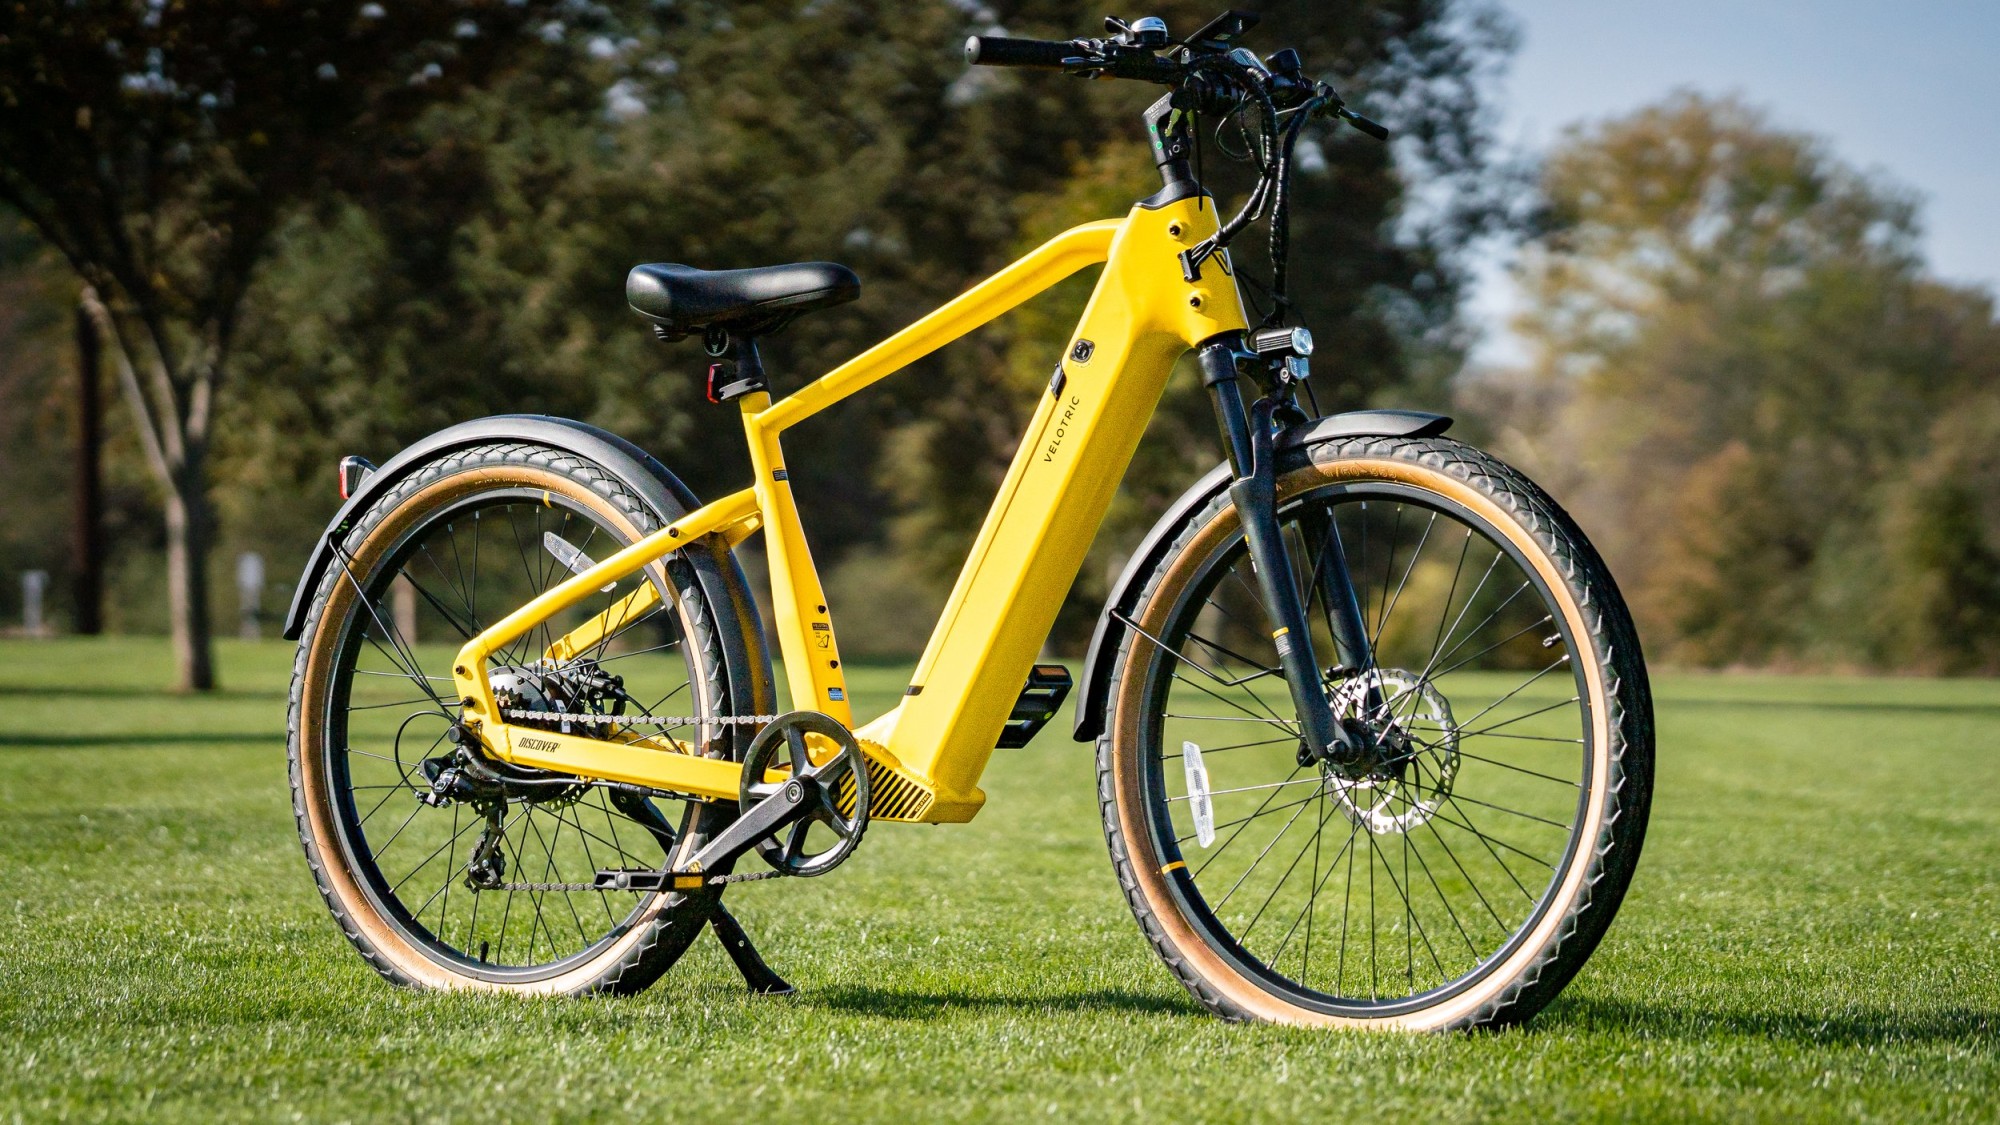 Velotric Discover 1 electric bike review: Accessibly built